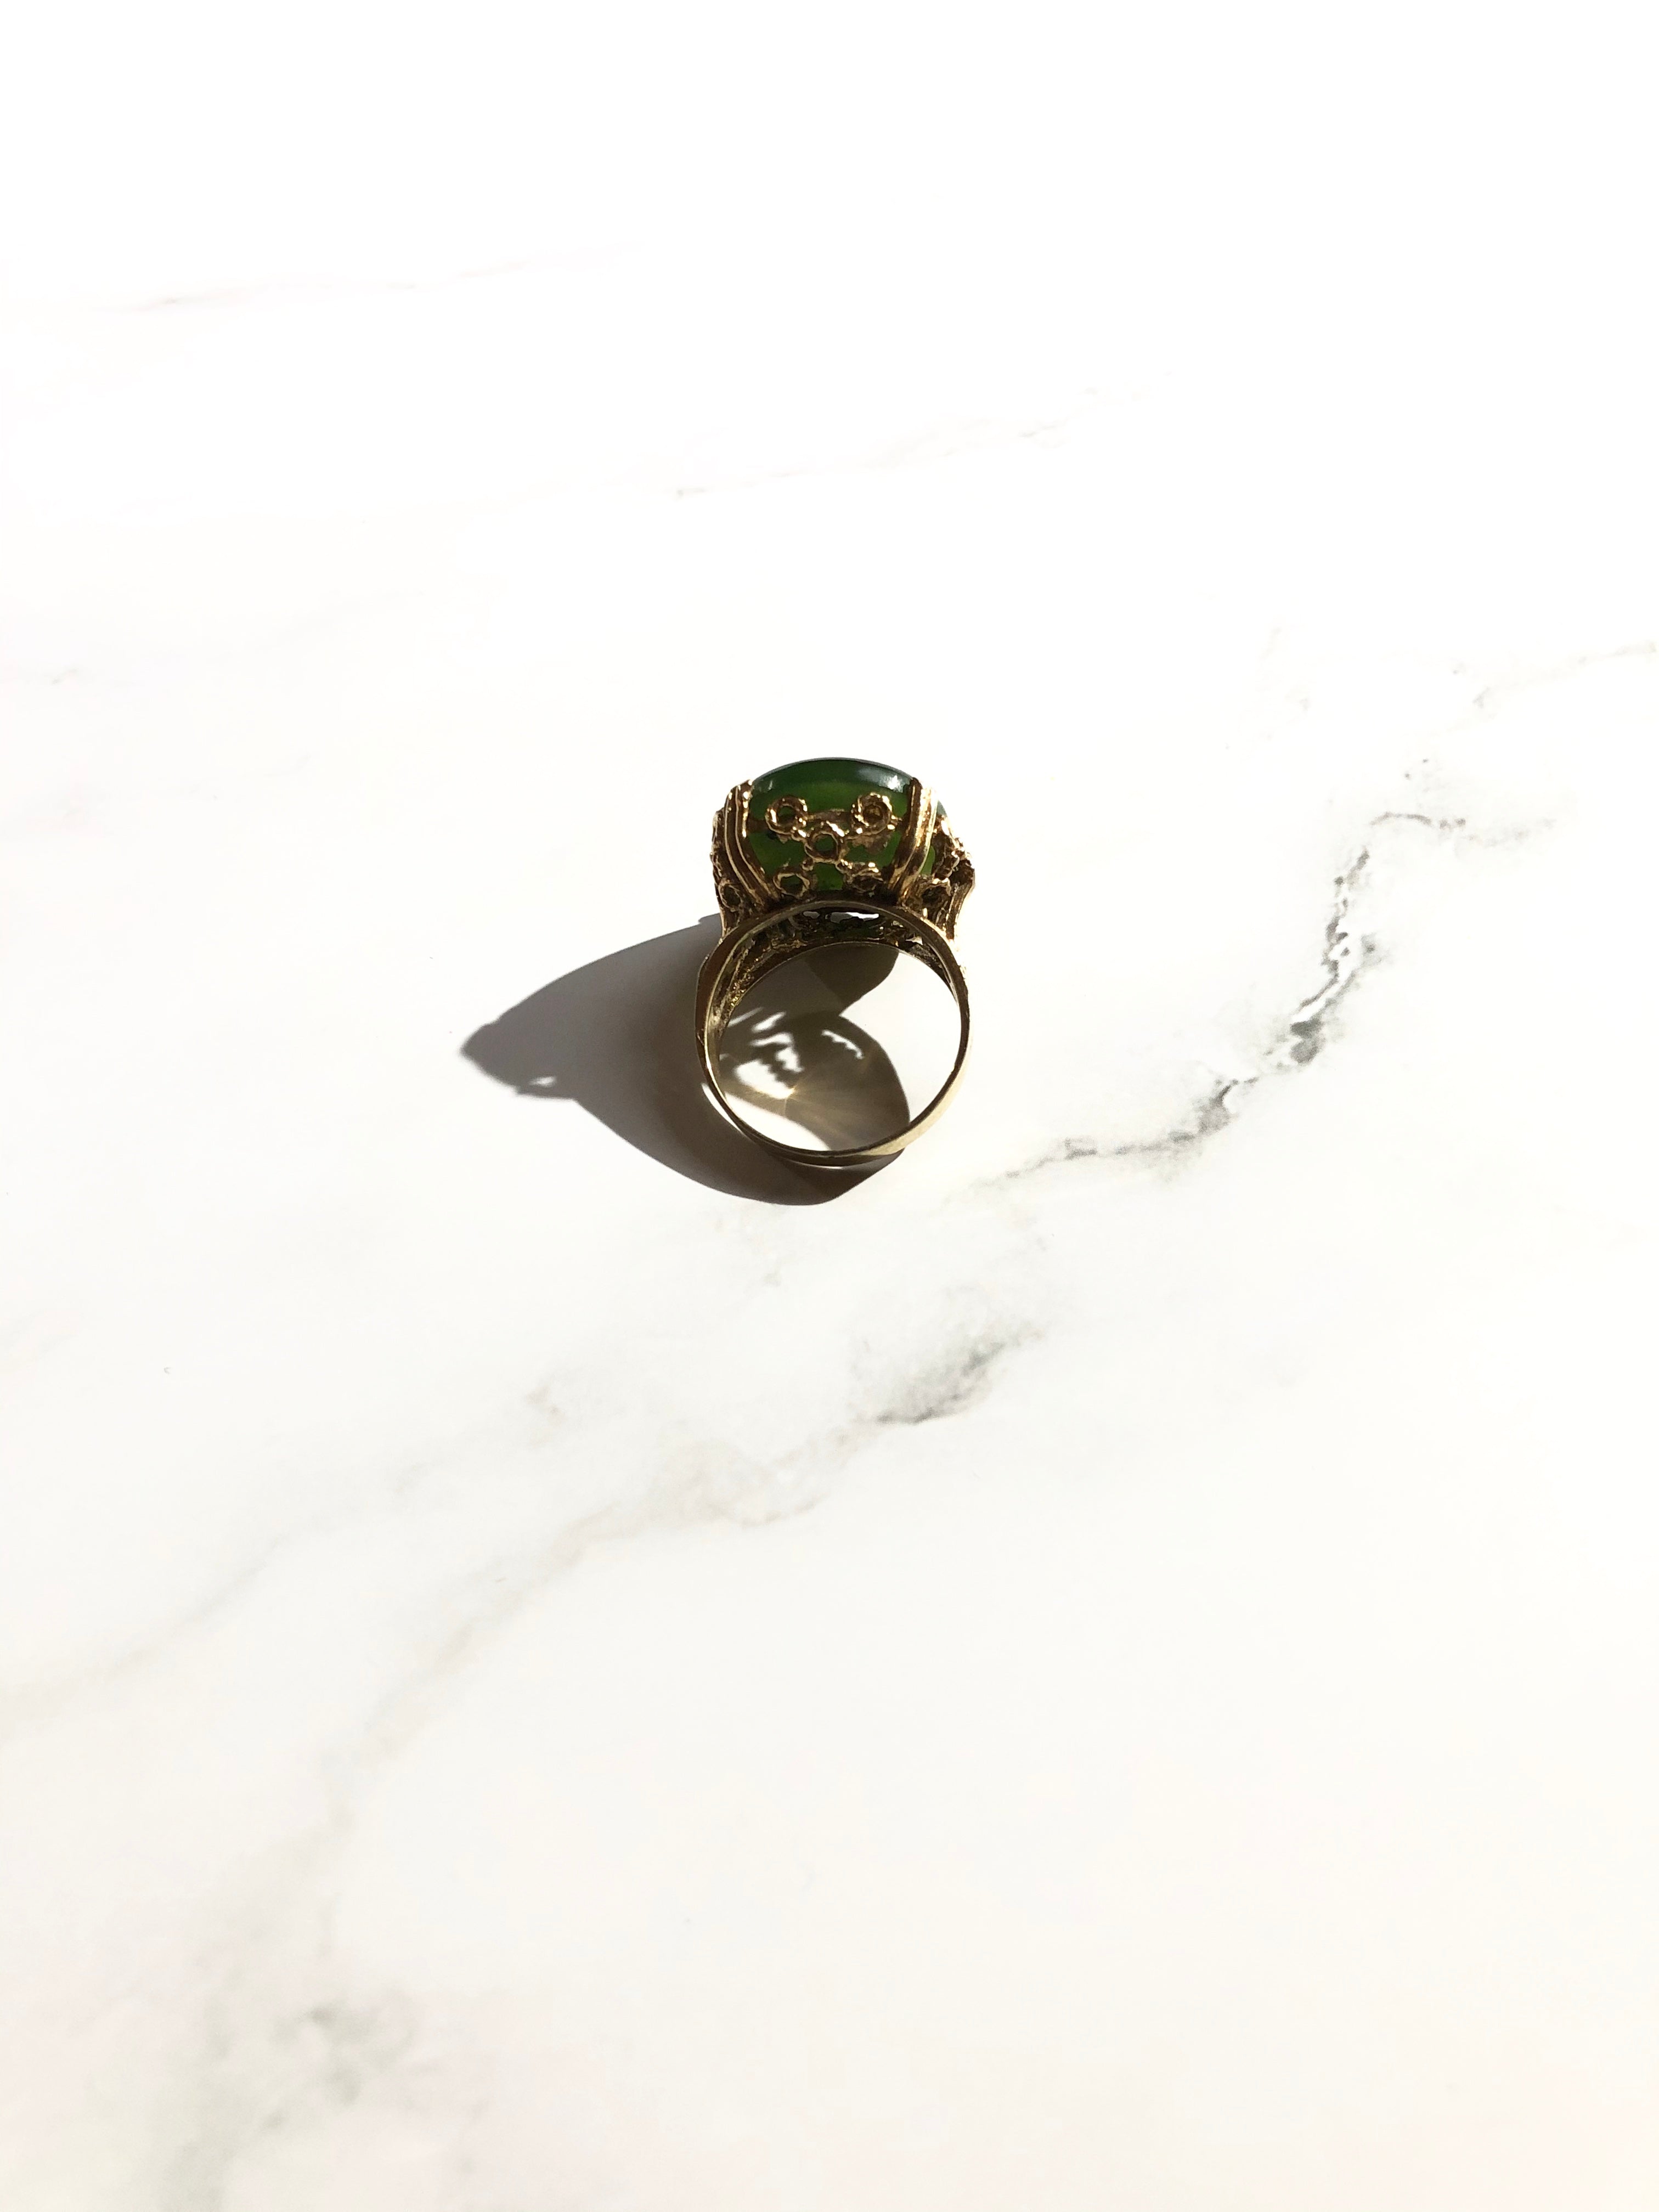 Round Green Cabochon Jade Gold Cocktail Ring